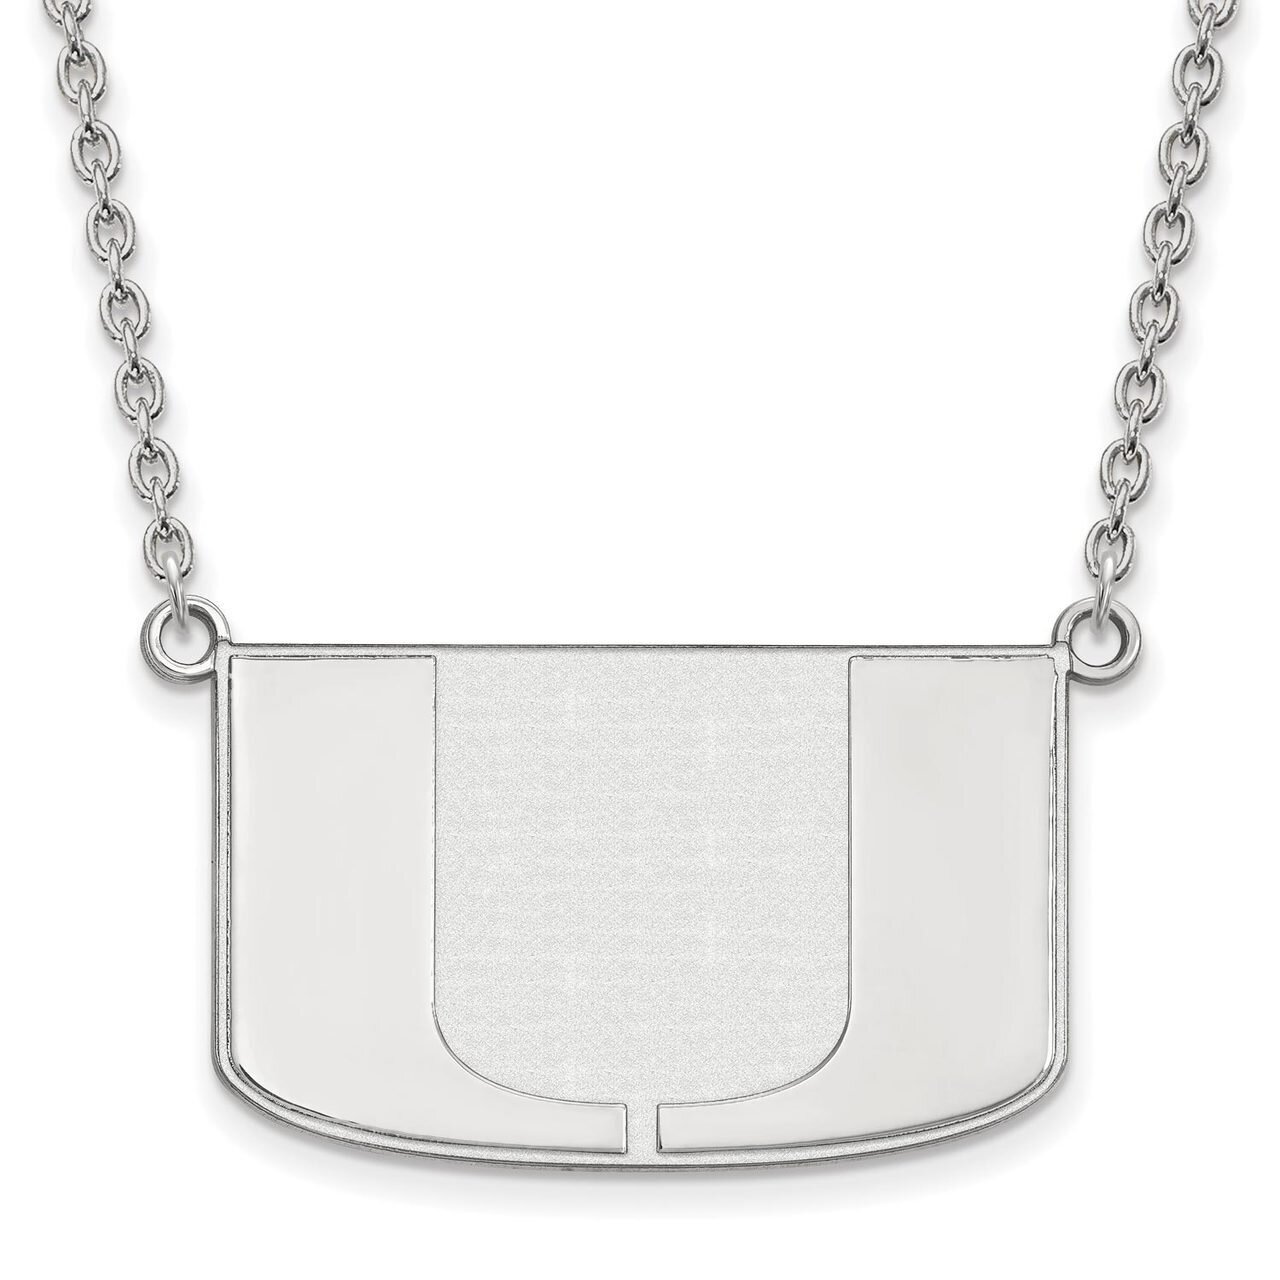 University of Miami Large Pendant with Chain Necklace 10k White Gold 1W016UMF-18